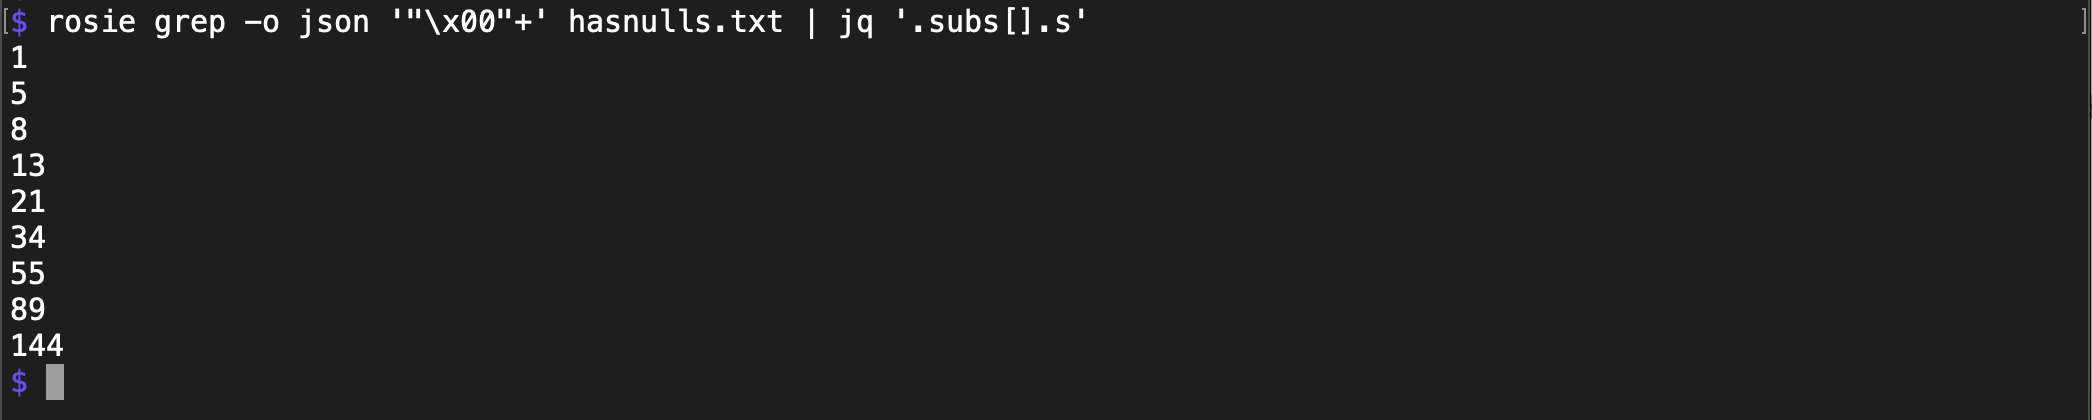 Command is: rosie grep -o json '"\x00"+' hasnulls.txt | jq '.subs[].s'